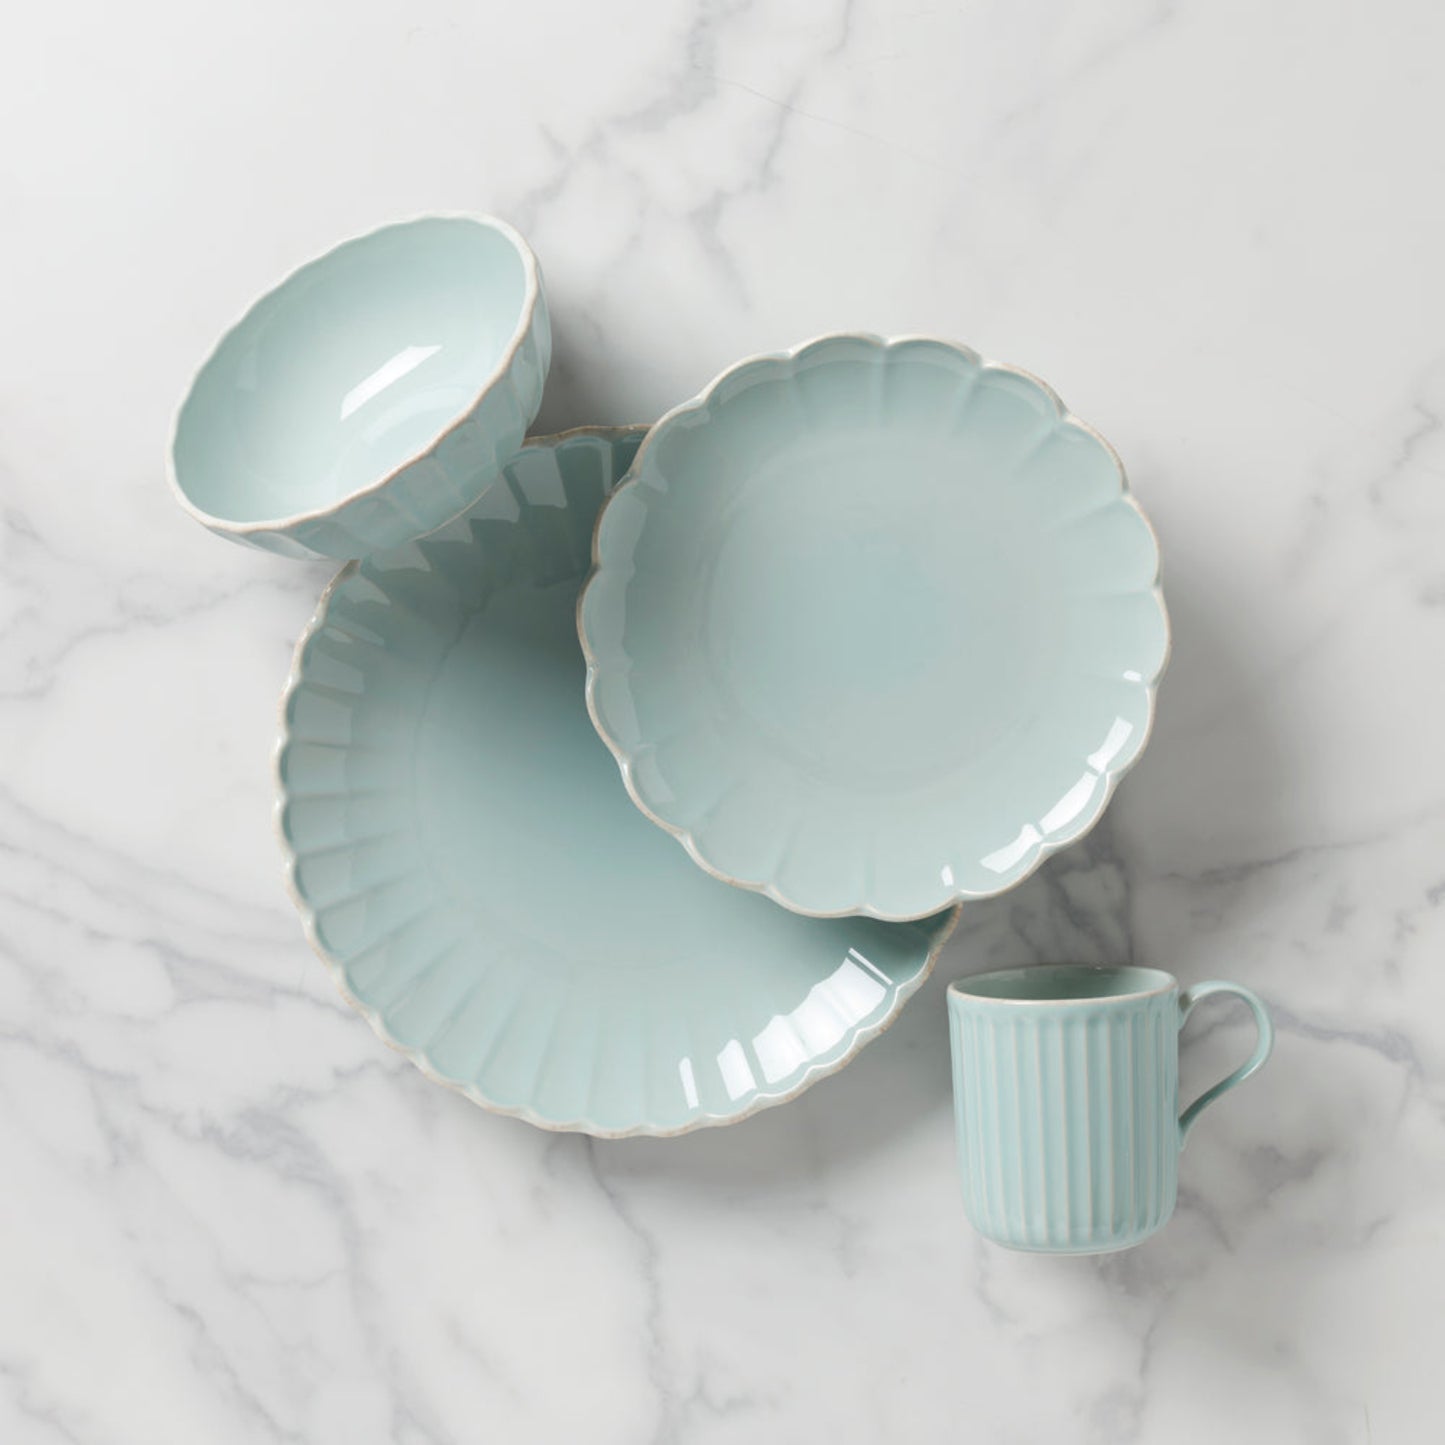 Lenox French Perle Scallop Ice Blue 4-Piece Place Setting